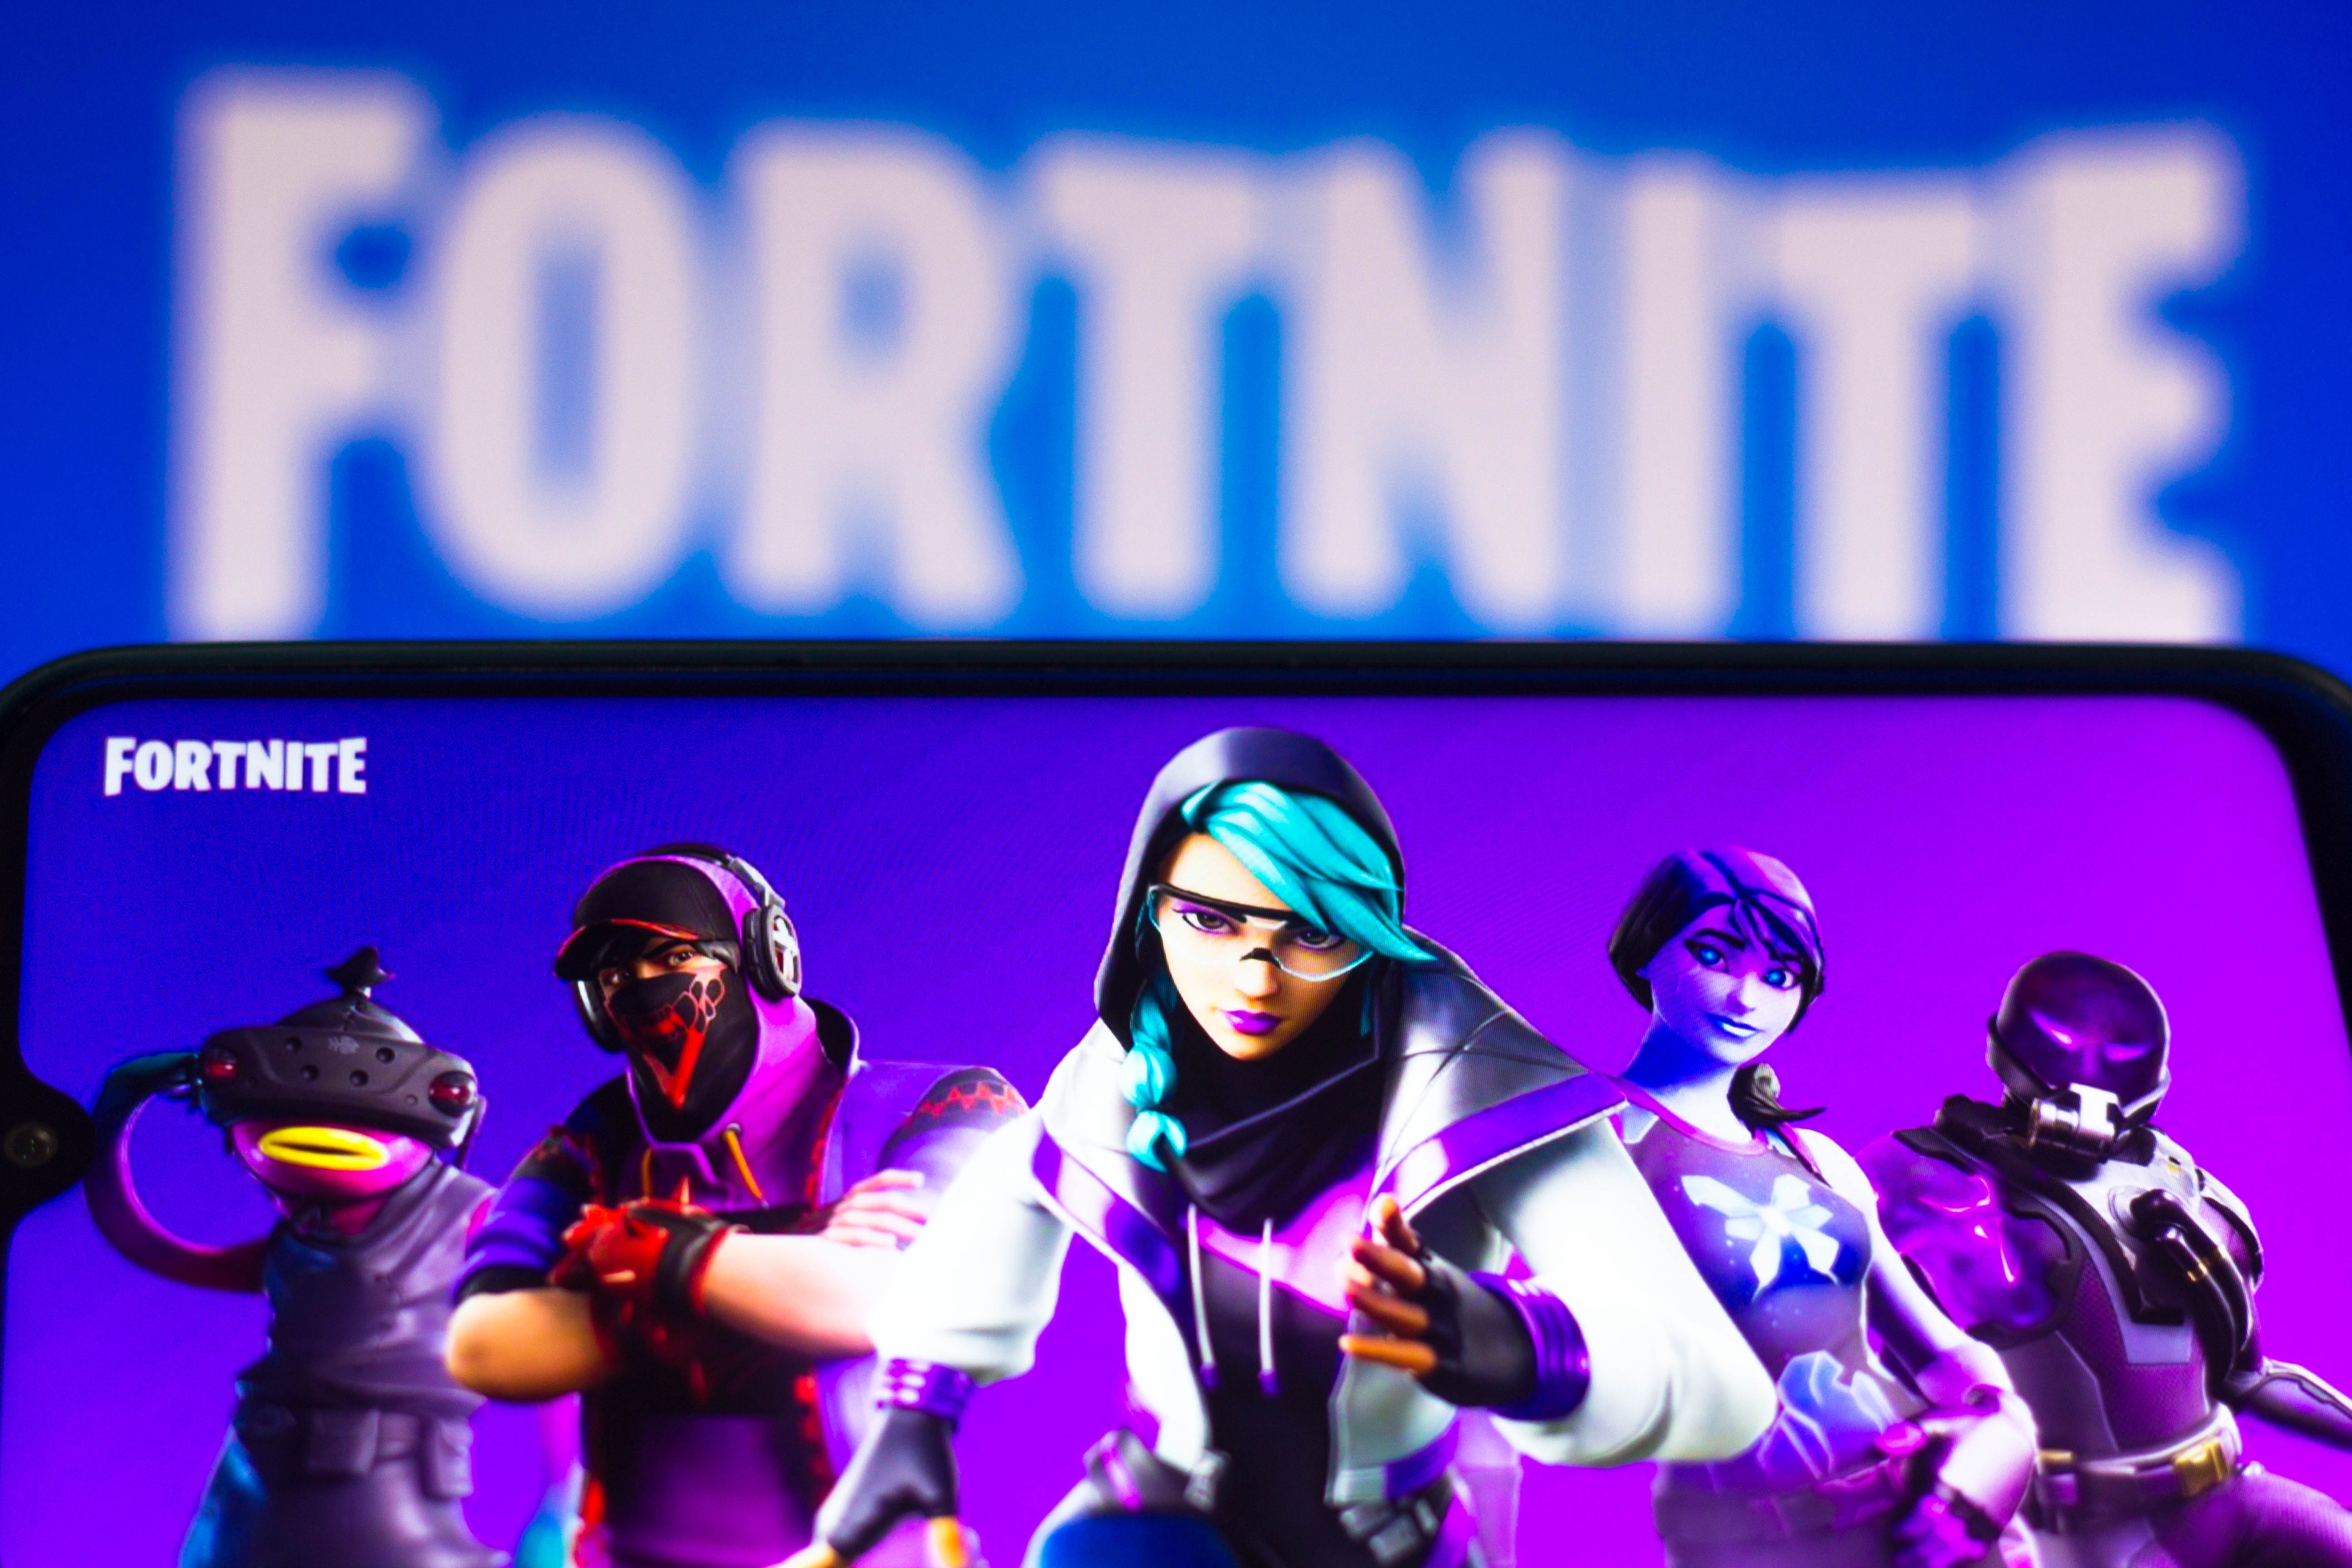 The Fortnite logo and avatars are seen on a smartphone and a computer screen.